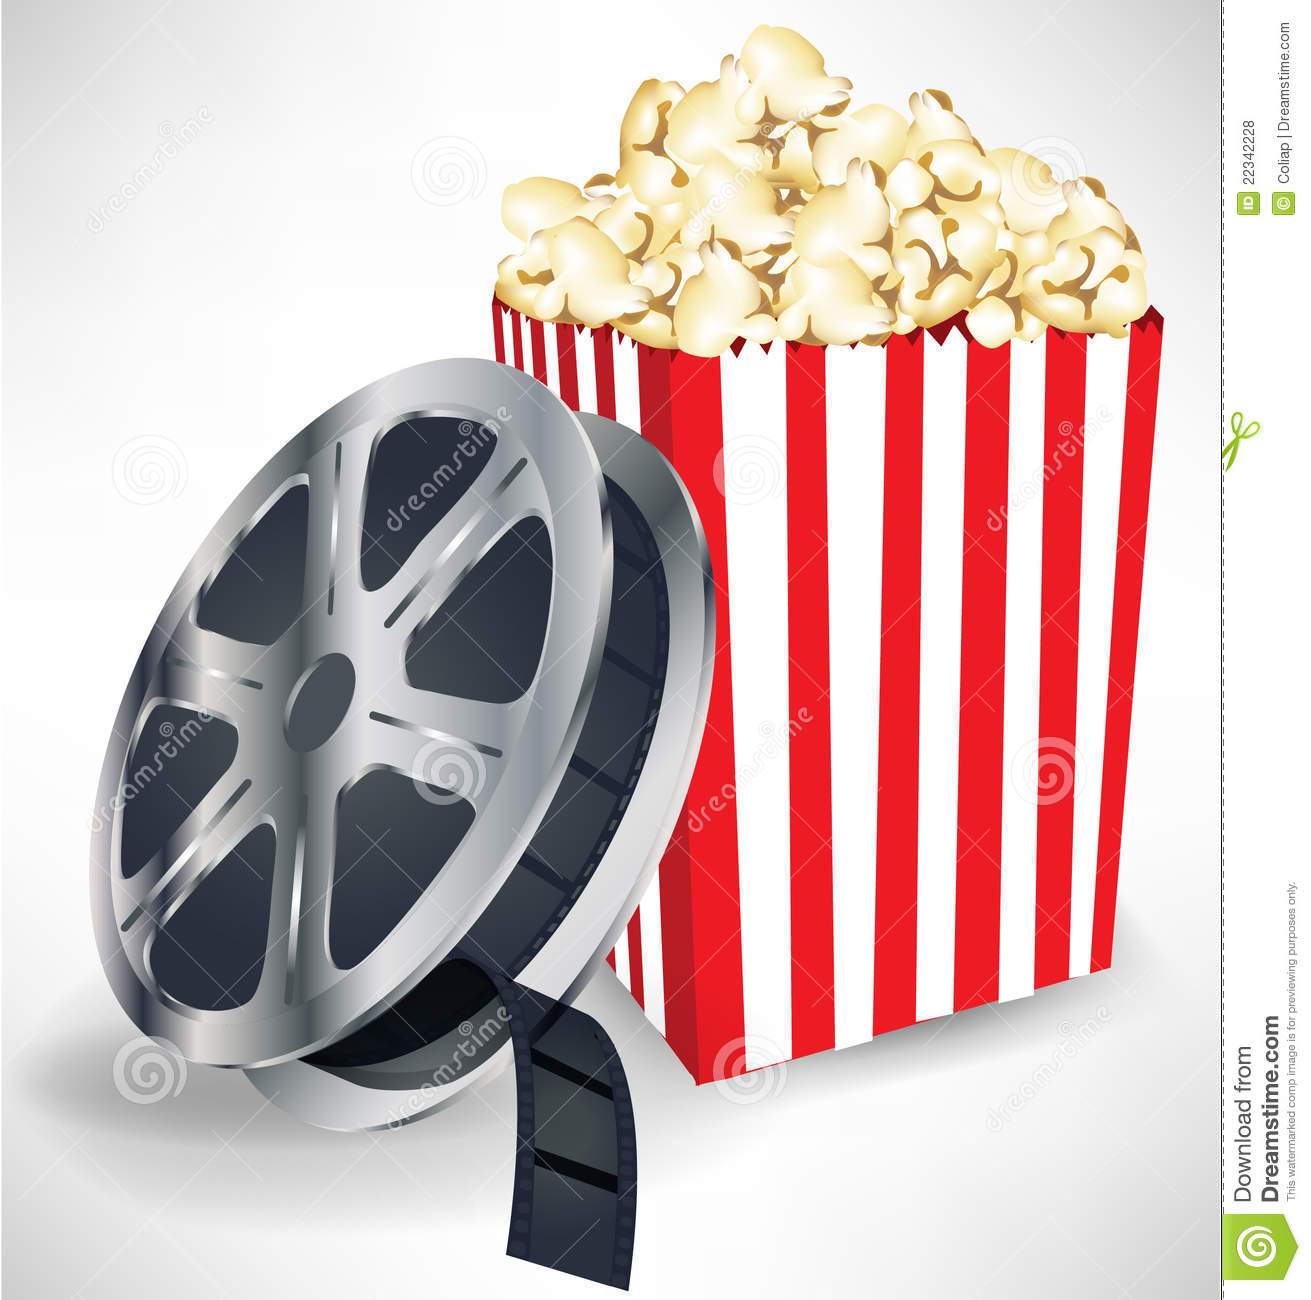 Movie reel and popcorn clipart